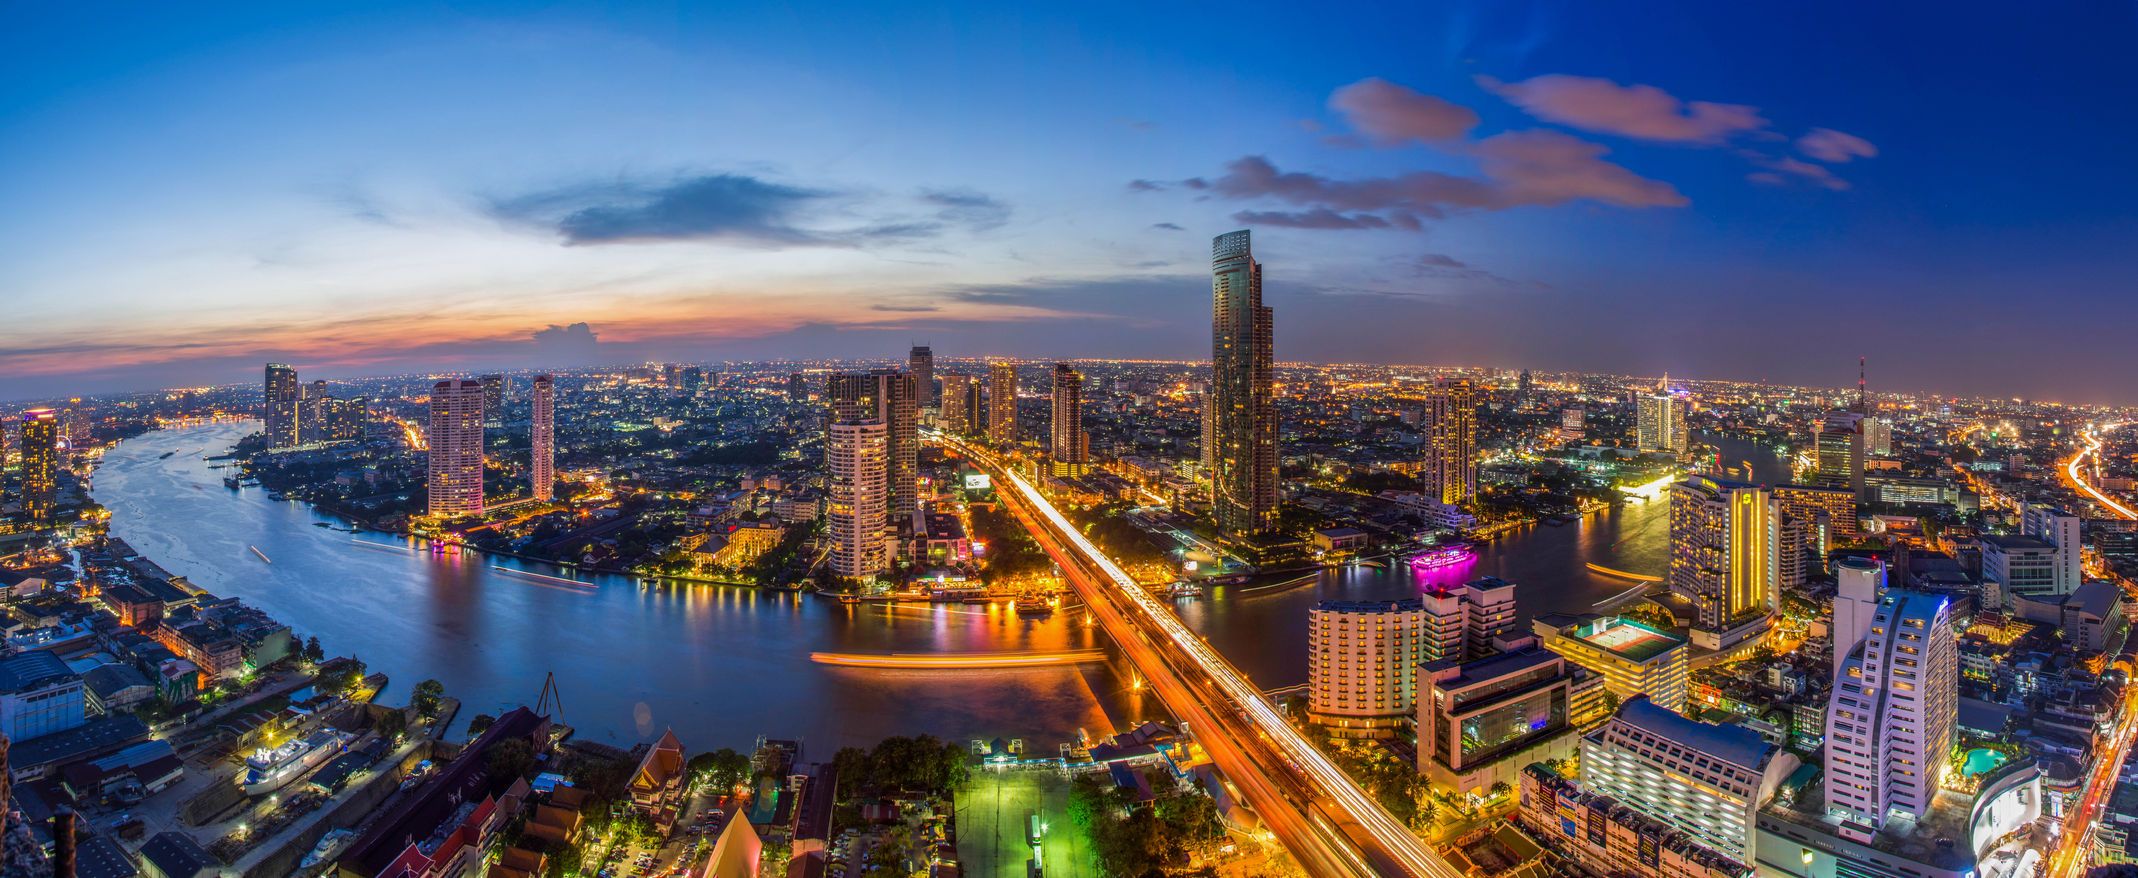 Get Ready: The First Thailand Personal Data Protection Act Has Been Passed.